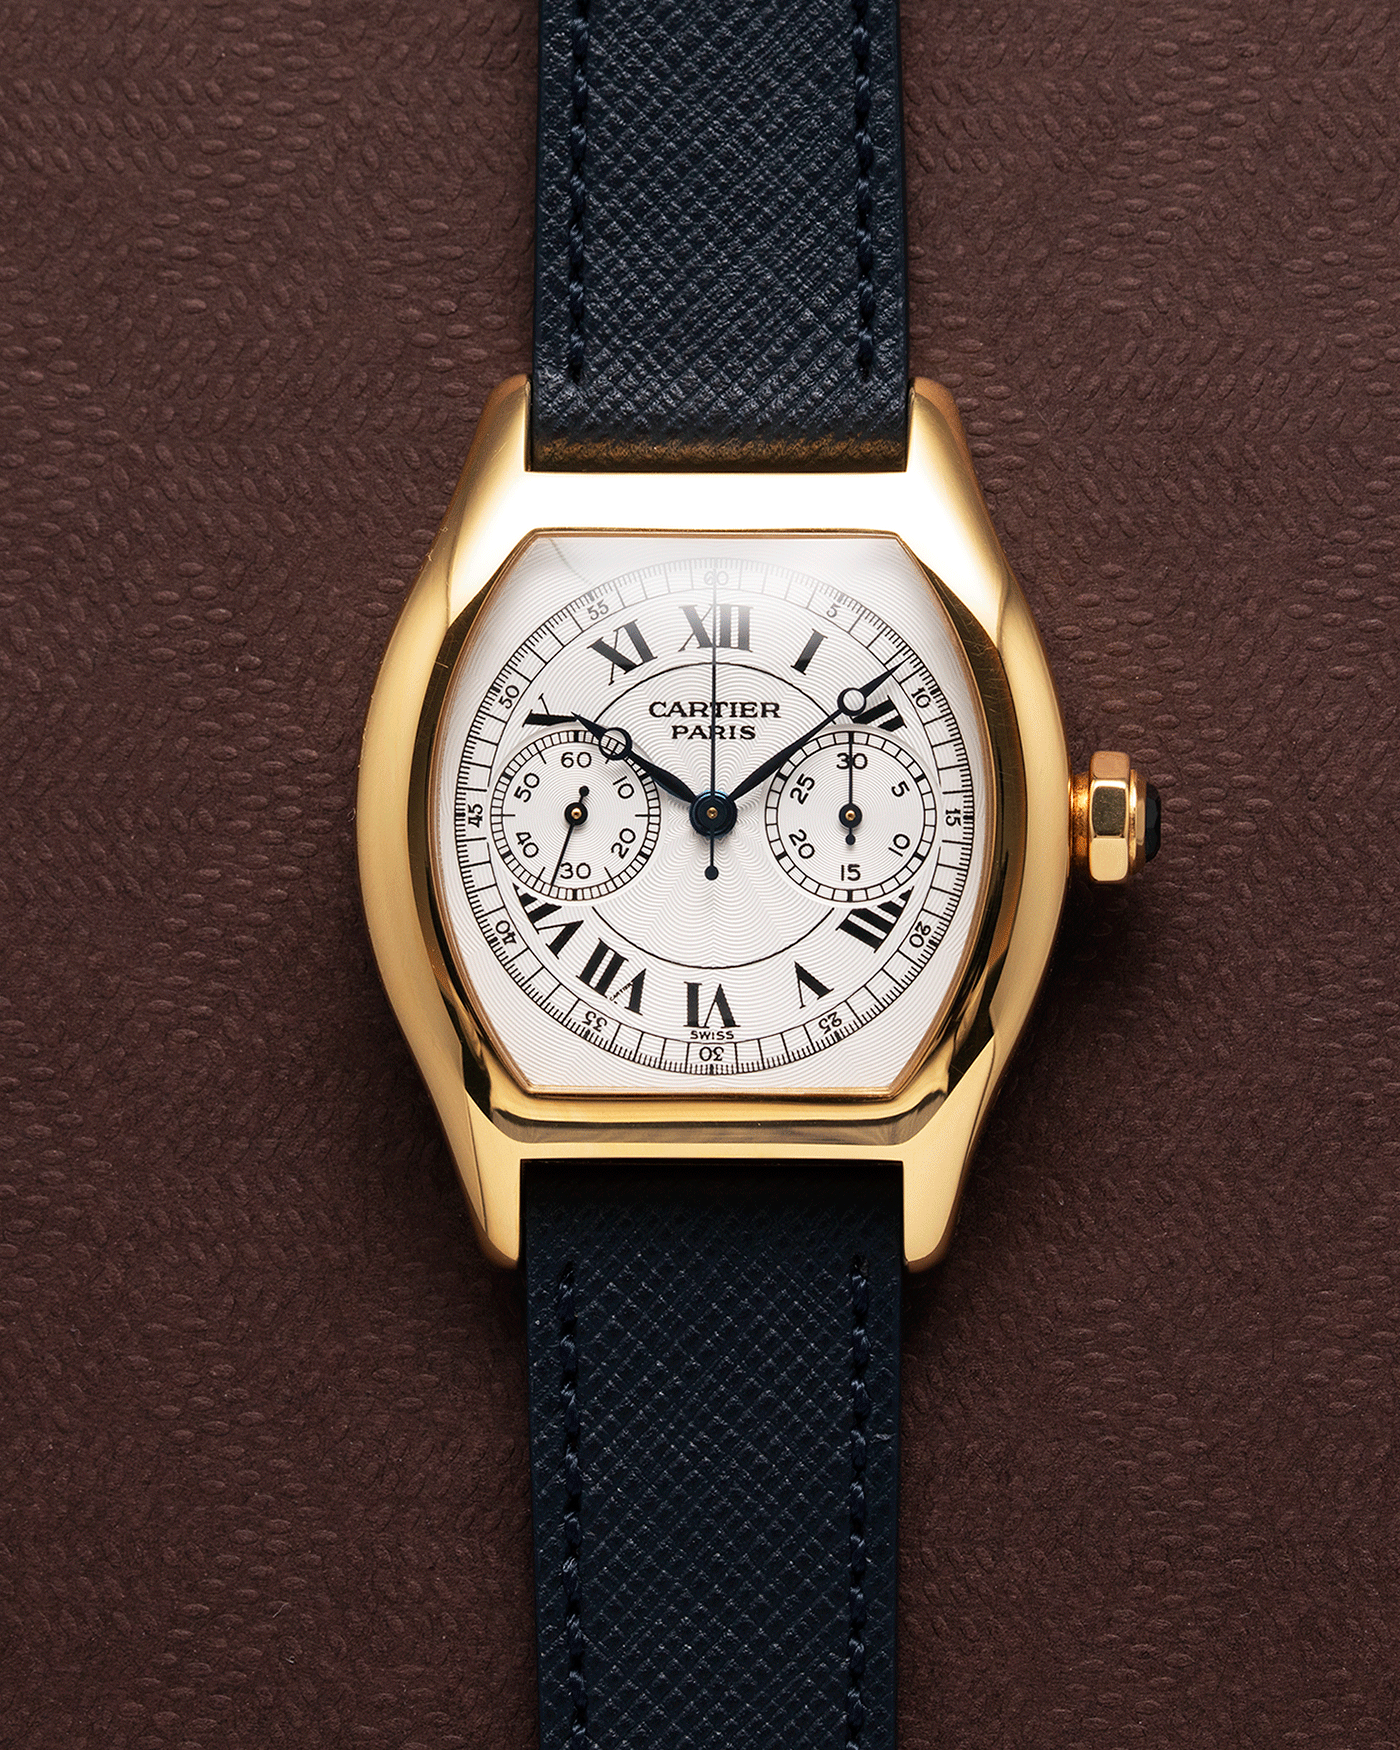 Brand: Cartier Year: 2000’s Model: CPCP Collection Prive Tortue Monopoussoir Reference: 2356E Material: 18k Yellow Gold Movement: THA Cal. 045MC Case Diameter: 43 x 35 mm Strap: Molequin Navy Blue Textured Calf with 18k Cartier Yellow Gold DeployantBrand: Cartier Year: 2000’s Model: CPCP Collection Prive Tortue Monopoussoir Reference: 2356E Material: 18k Yellow Gold Movement: THA Cal. 045MC Case Diameter: 43 x 35 mm Strap: Molequin Navy Blue Textured Calf with 18k Cartier Yellow Gold Deployant